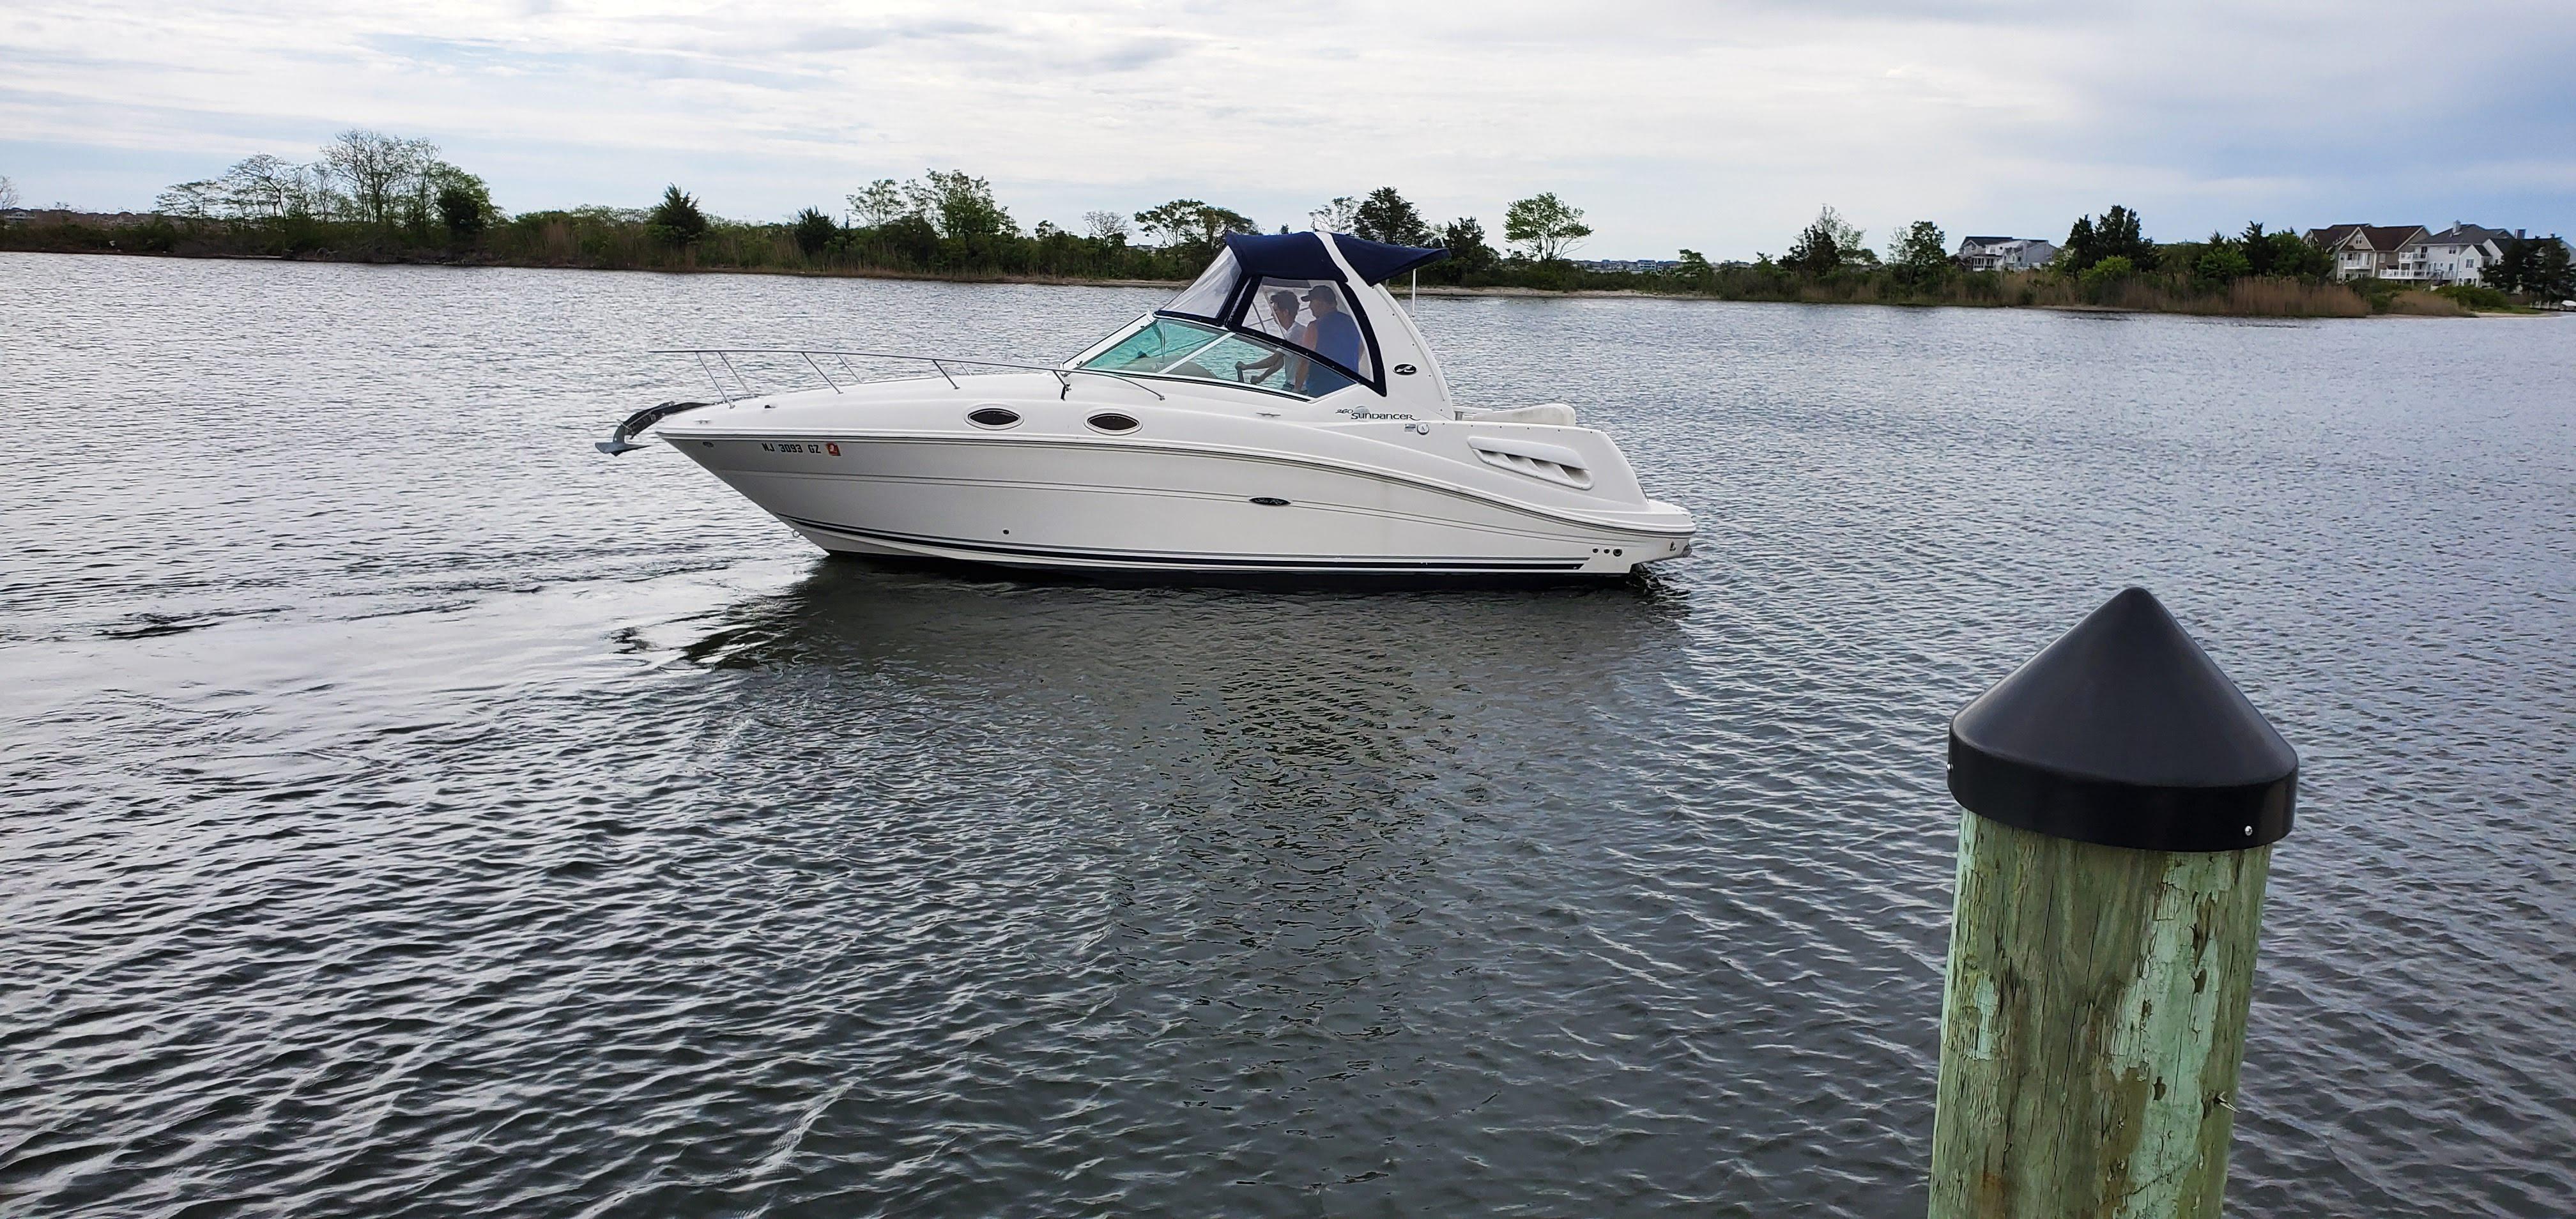 LIVE ONSITE & ONLINE 2006 SEARAY SUNDANCER 260 - SALE POSTPONED 24 HOURS!  NEW DATE: SATURDAY JULY 11TH @ 3PM!